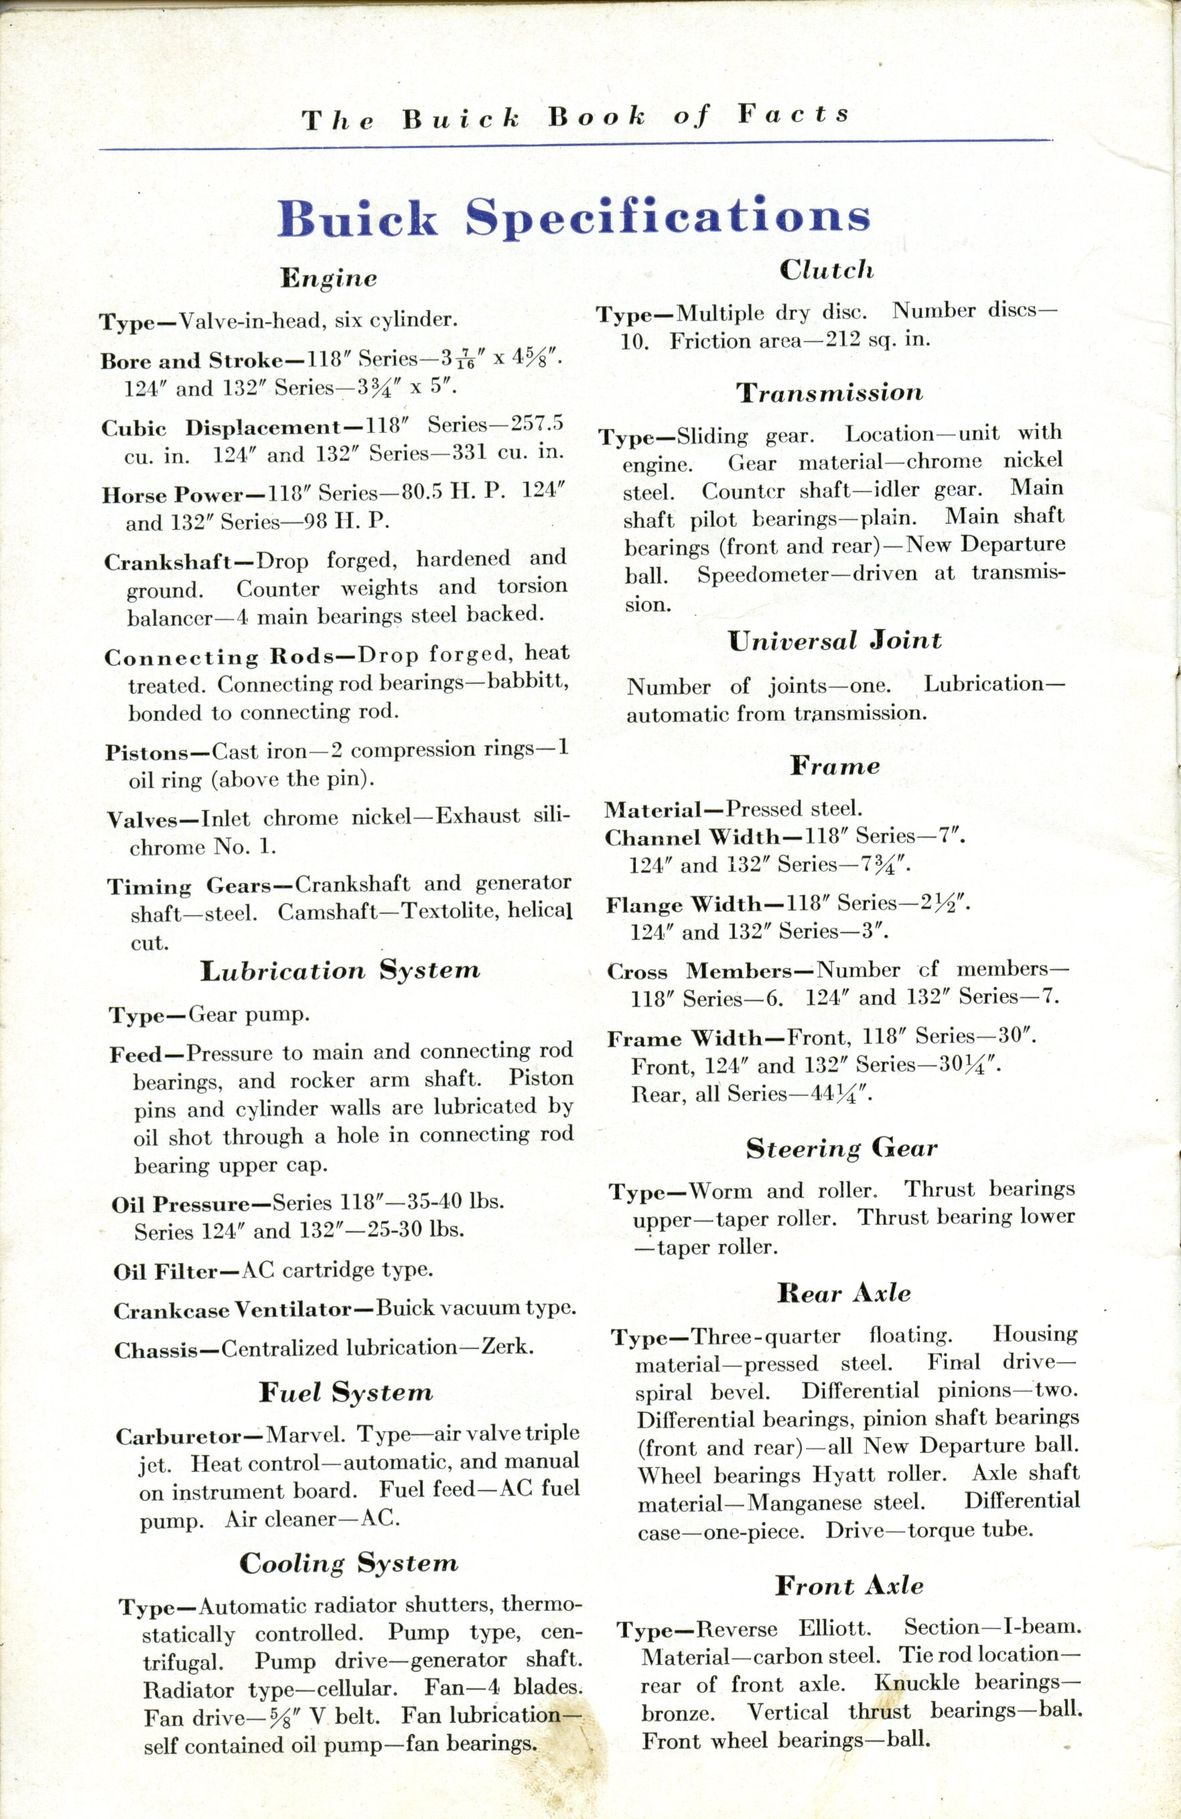 1930 Buick Book of Facts-30